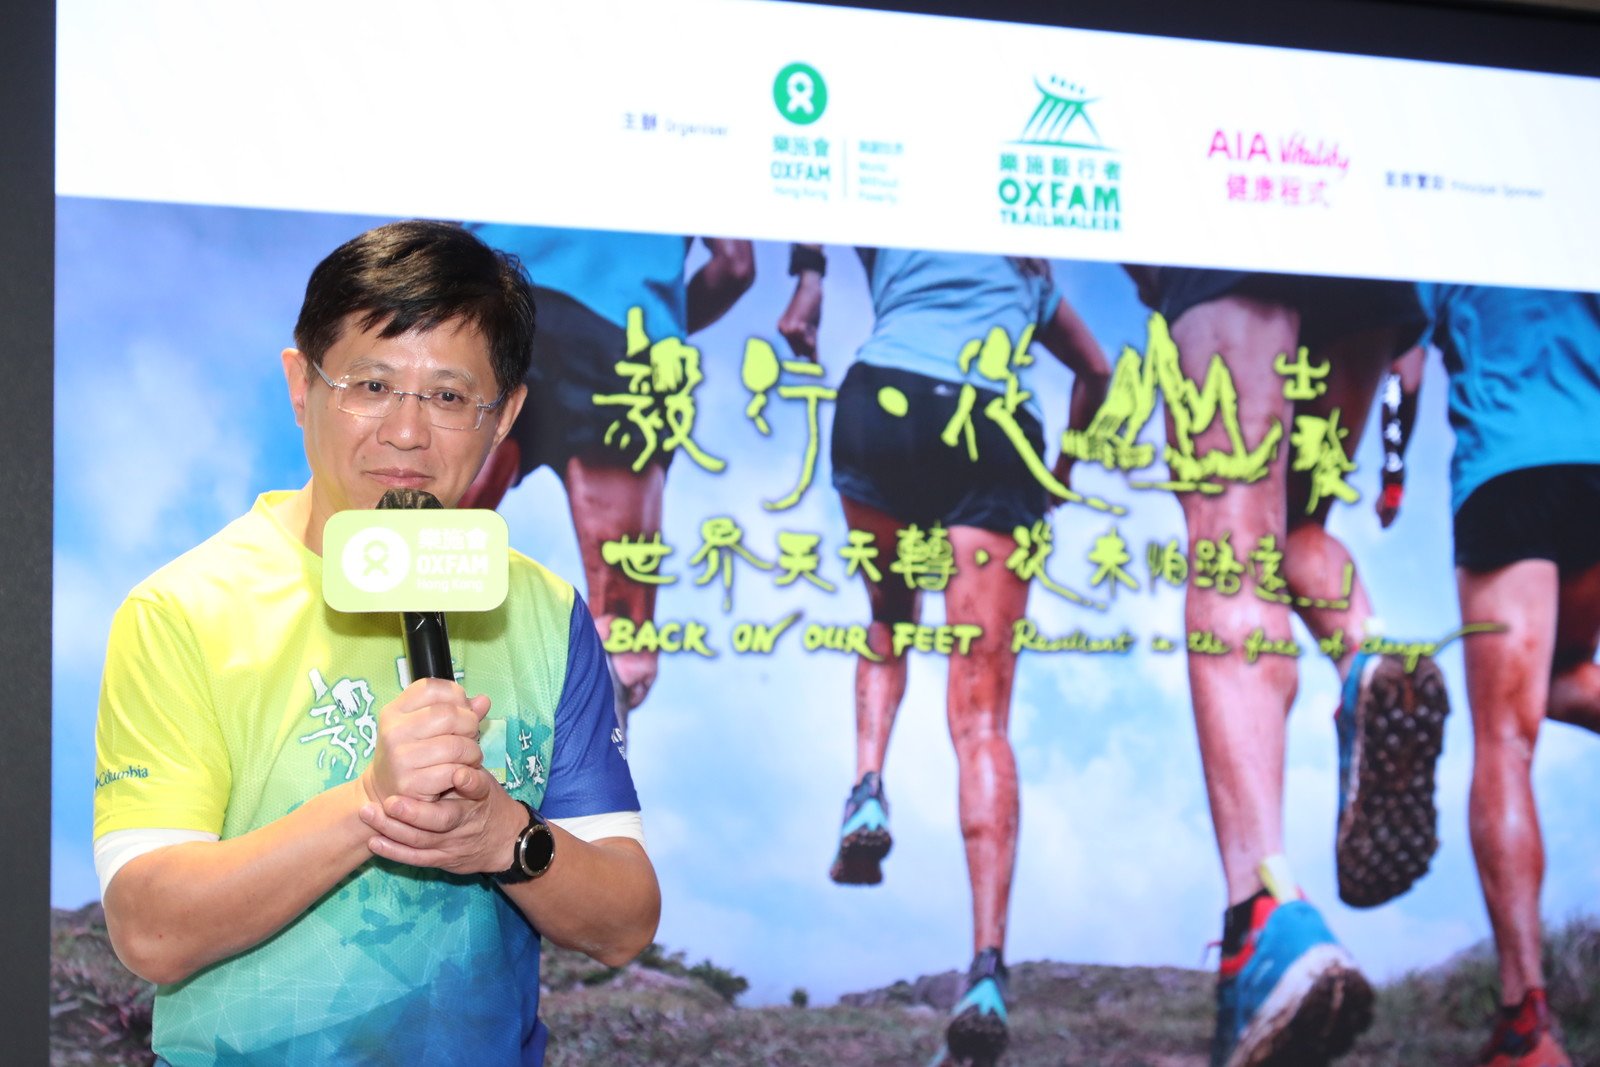 Dr. Ho Hiu Fai, experienced OTW participant and medical volunteer, said that the medical volunteers will be at the event to support participants and help them overcome the challenges they meet along the trail.